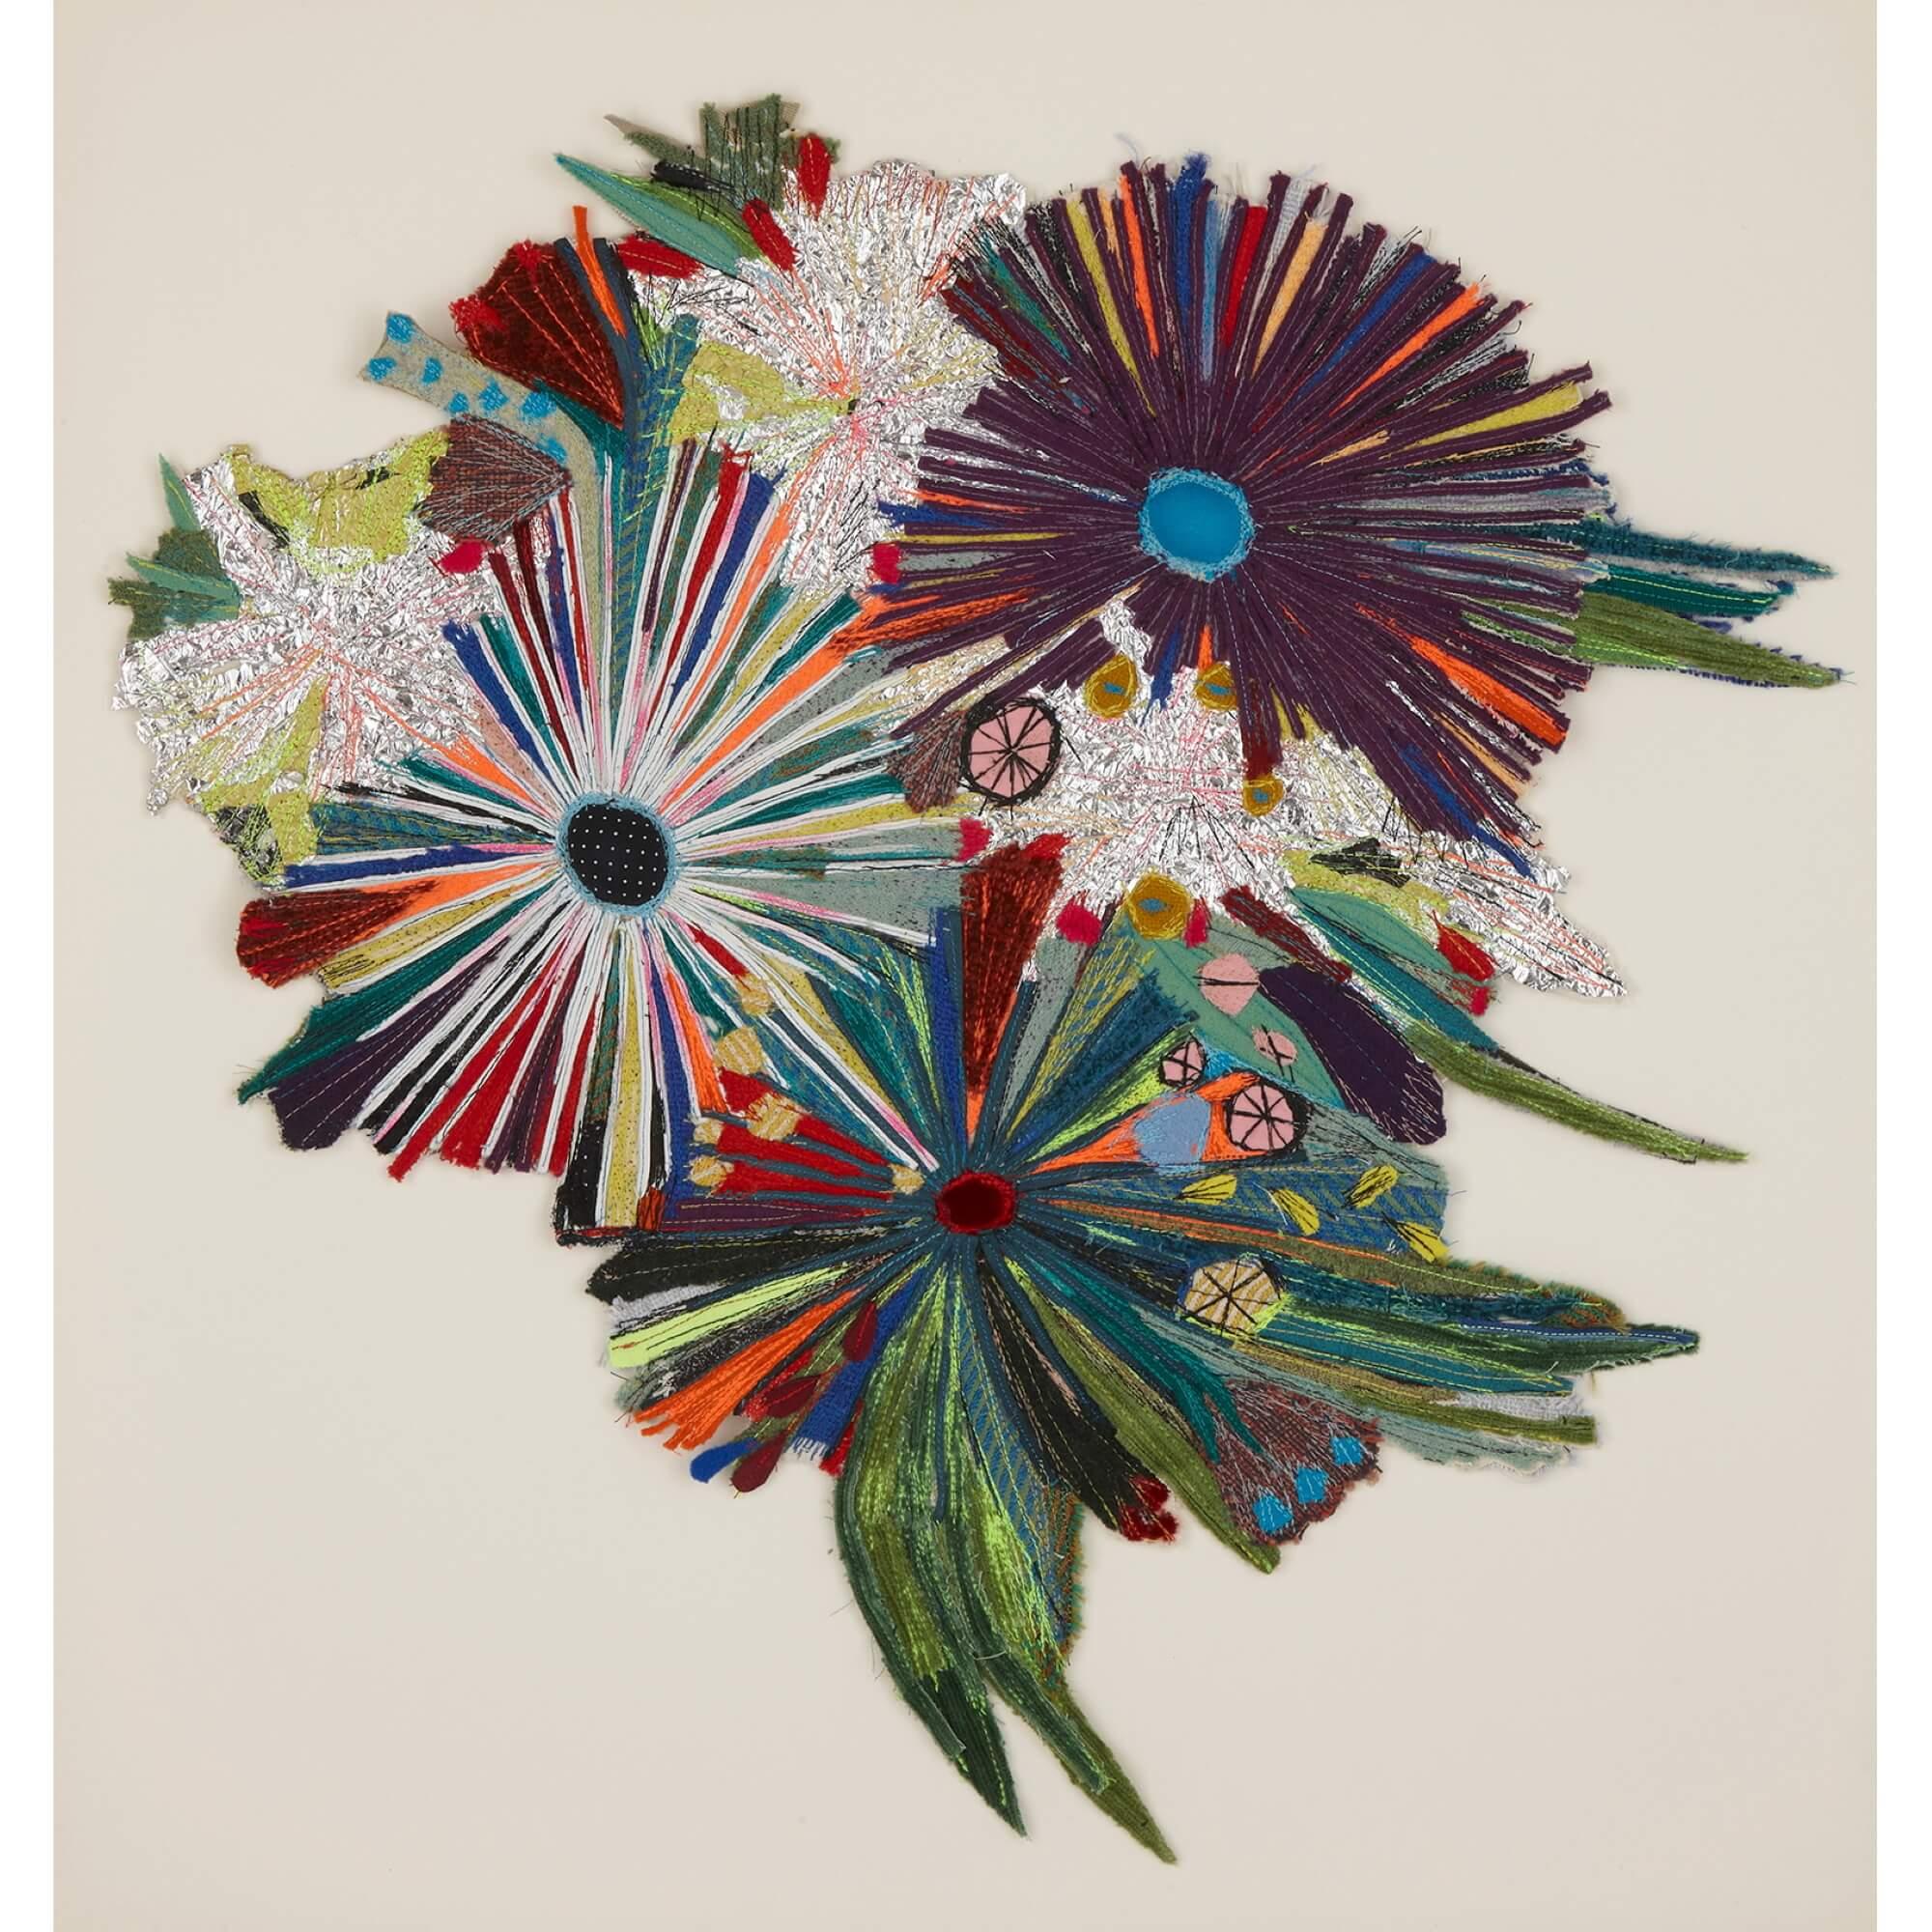 Contemporary floral recycled textile panel by Elodie Blanchard 
American, 2022
Height 70cm, width 64.5cm, depth 4cm 

Made using a number of recycled materials, the artist celebrates the discarded materials and turns them into desirable and